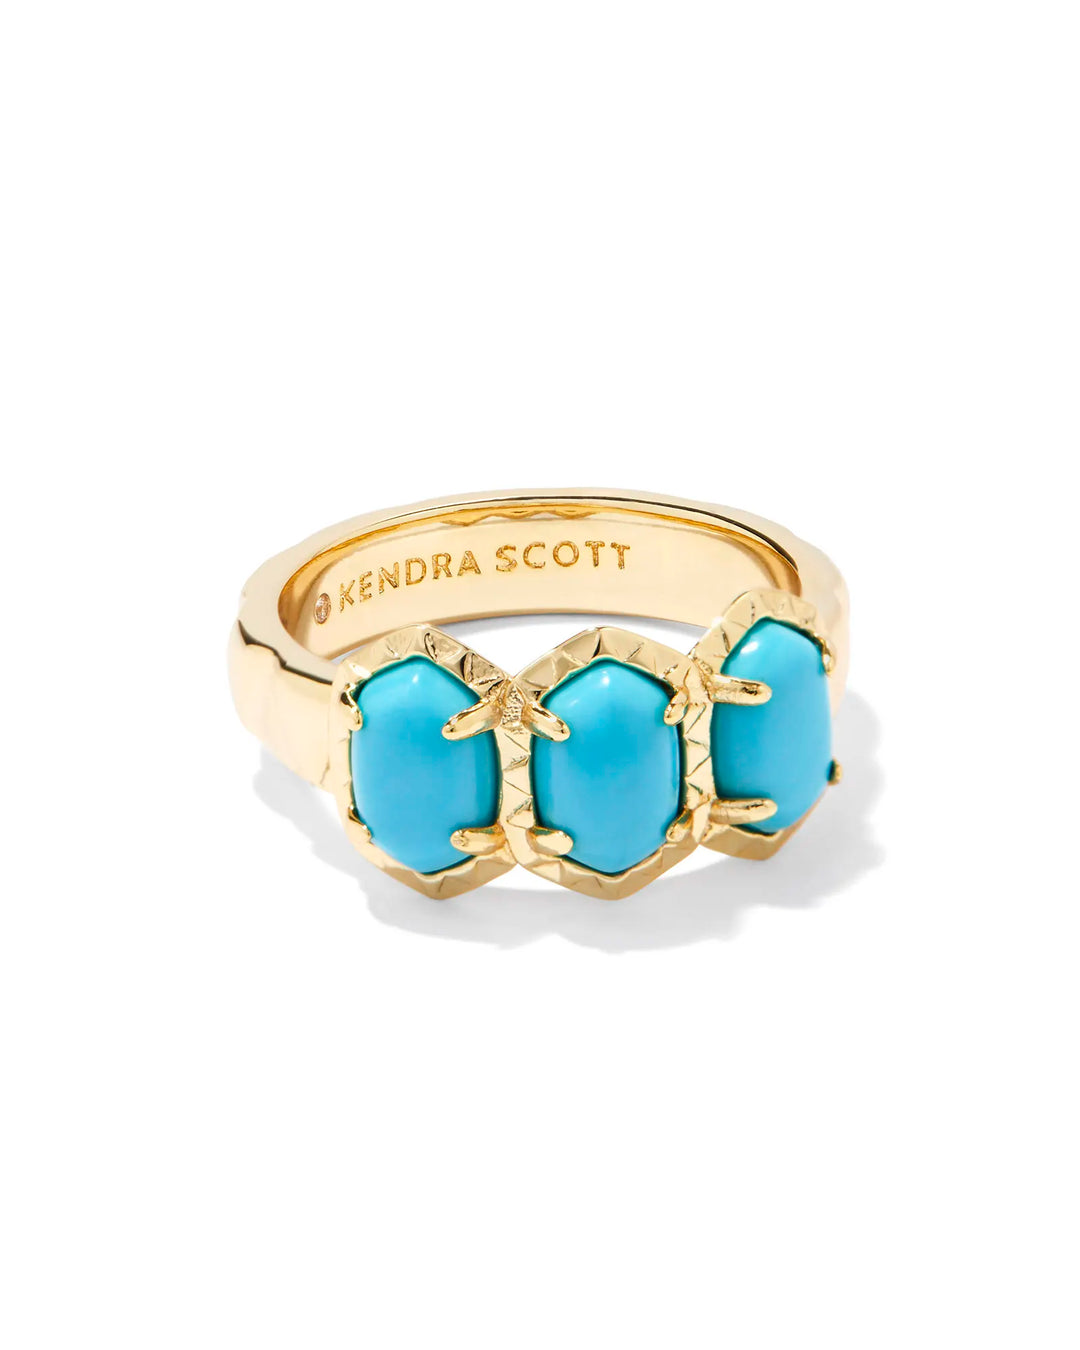 Kendra Scott Daphne Band Ring in Variegated Turquoise on Gold